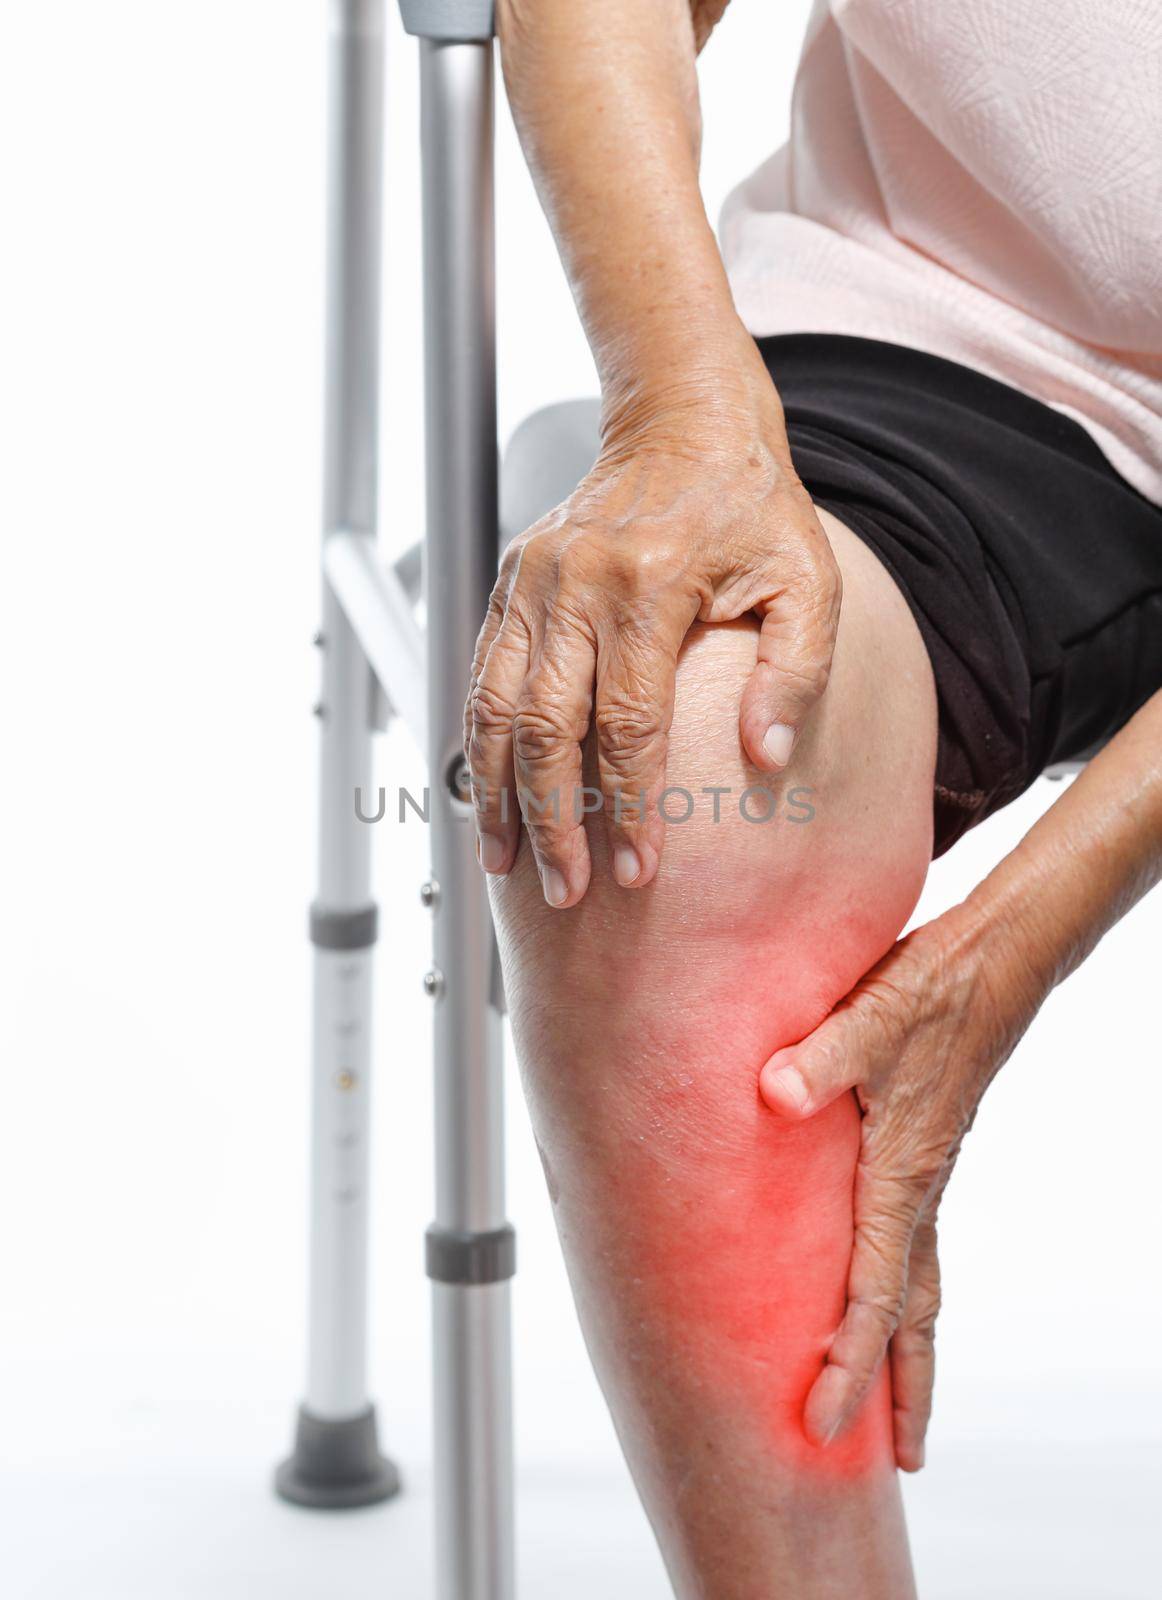 Calf pain in elderly woman by toa55